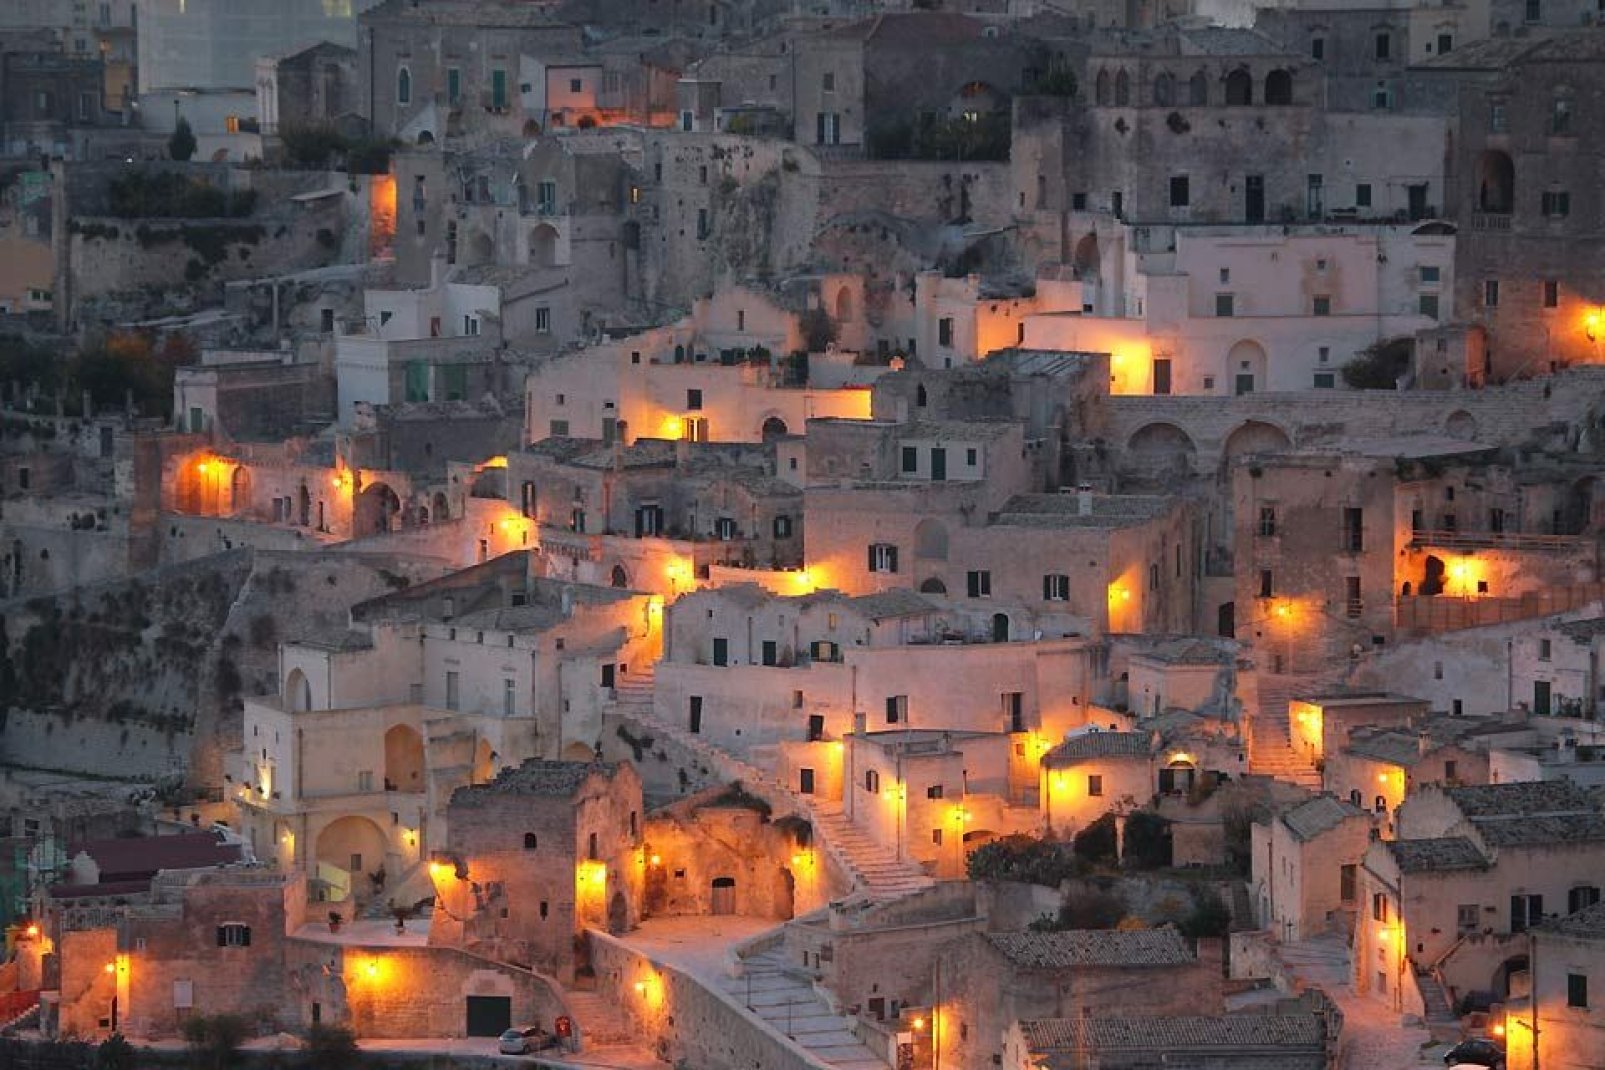 "Anyone who sees Matera cannot help but be awe-struck, so expressive and touching is its sorrowful beauty", wrote Carlo Levi.